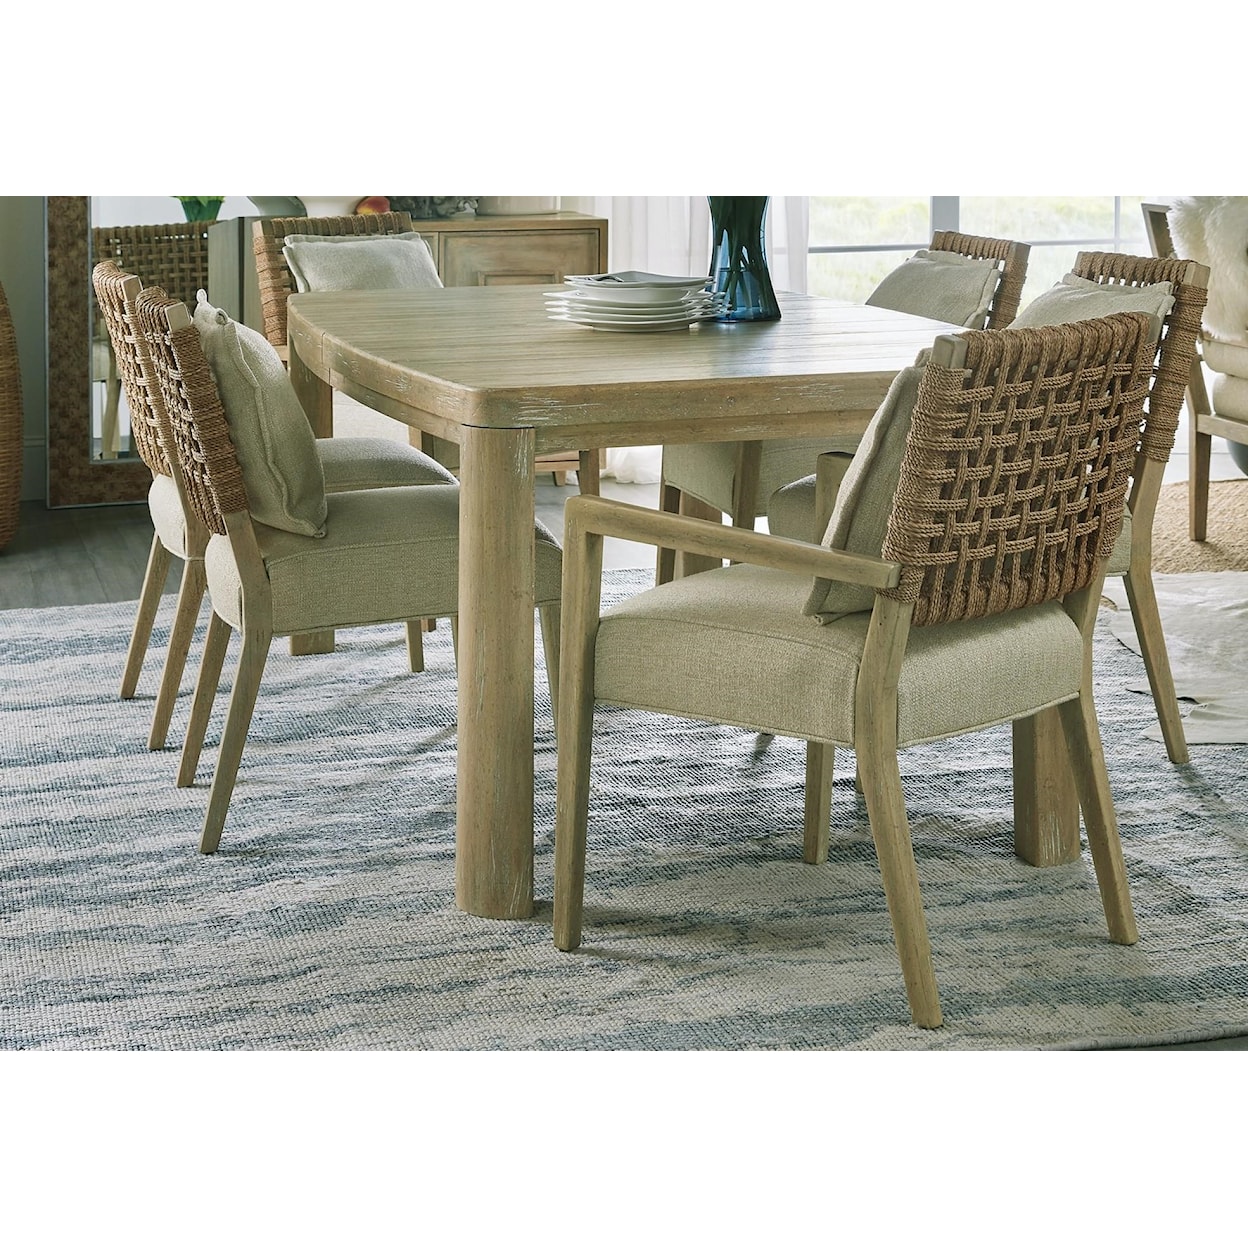 Hooker Furniture Surfrider 7-Piece Table and Chair Set